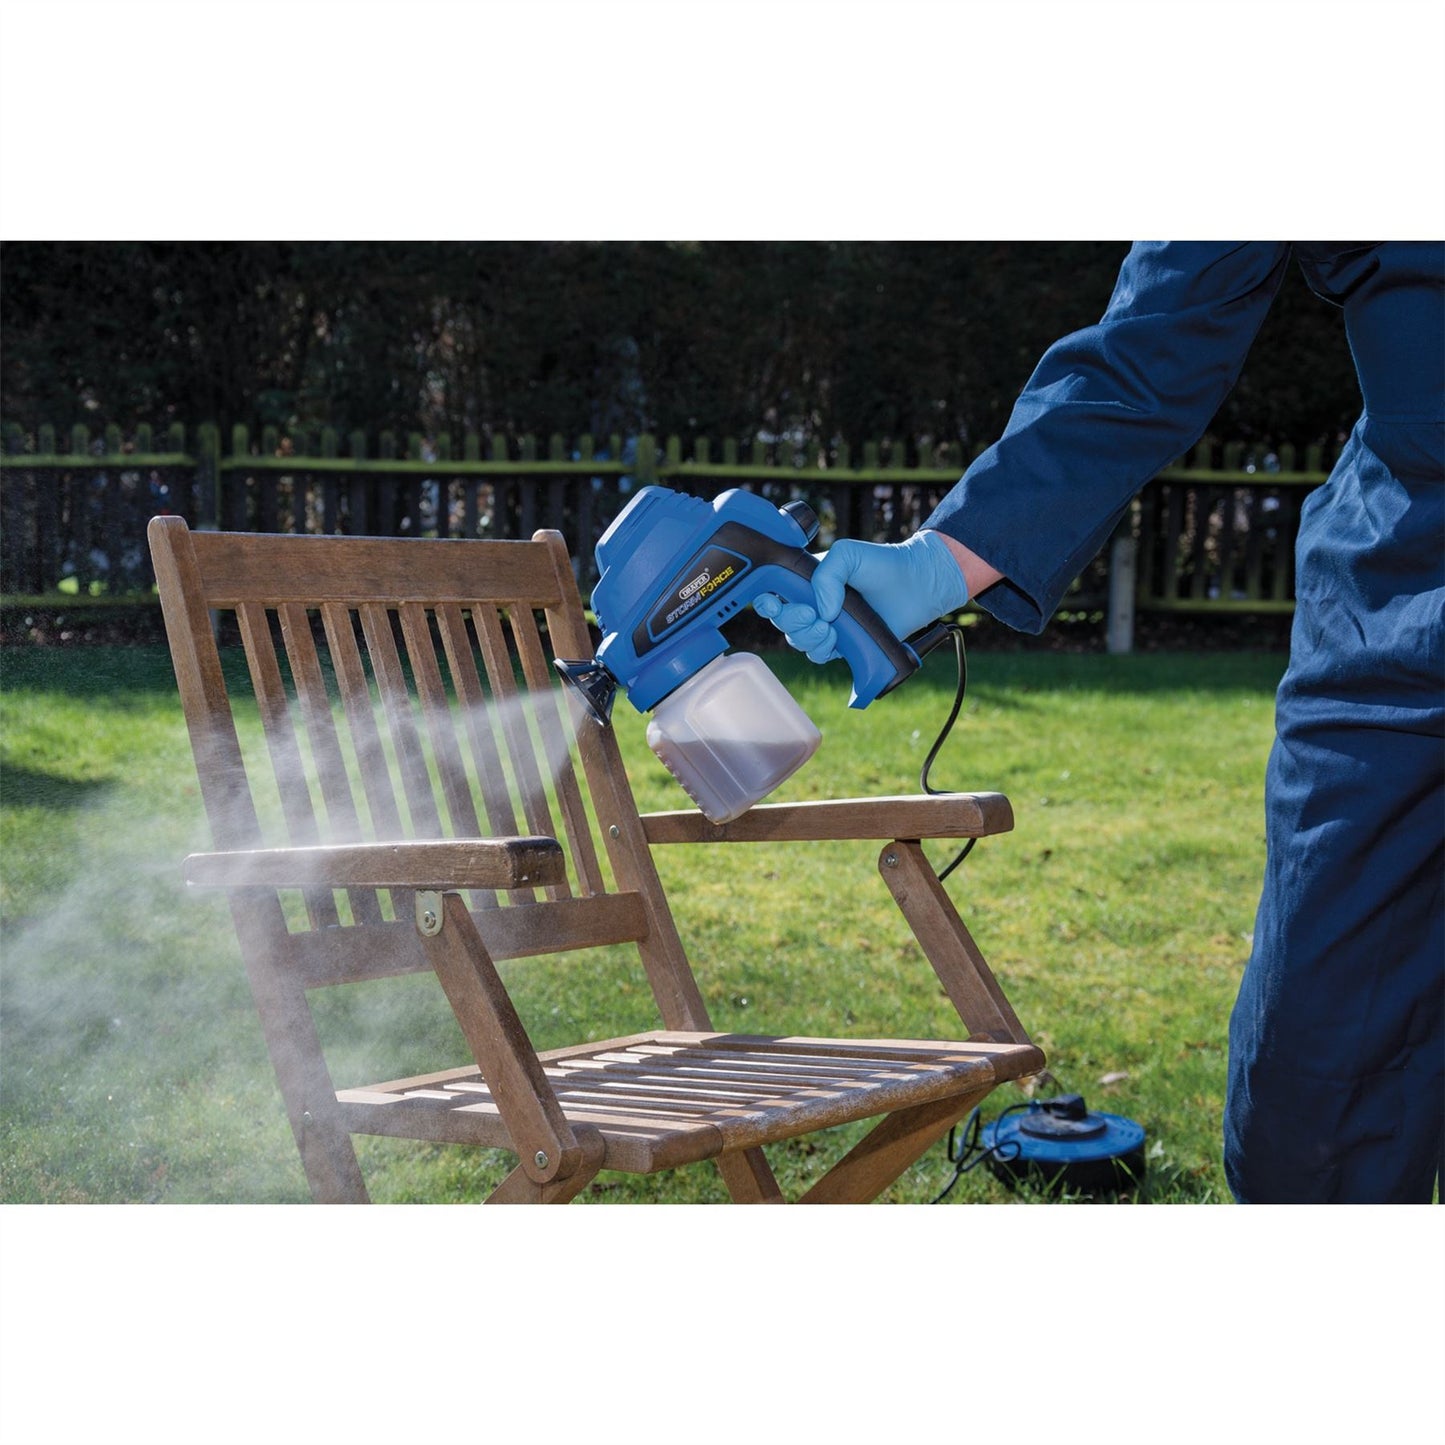 Draper Electric Airless Fence/Shed Spray Sprayer Wood Stain/Paint Gun 80W 83657